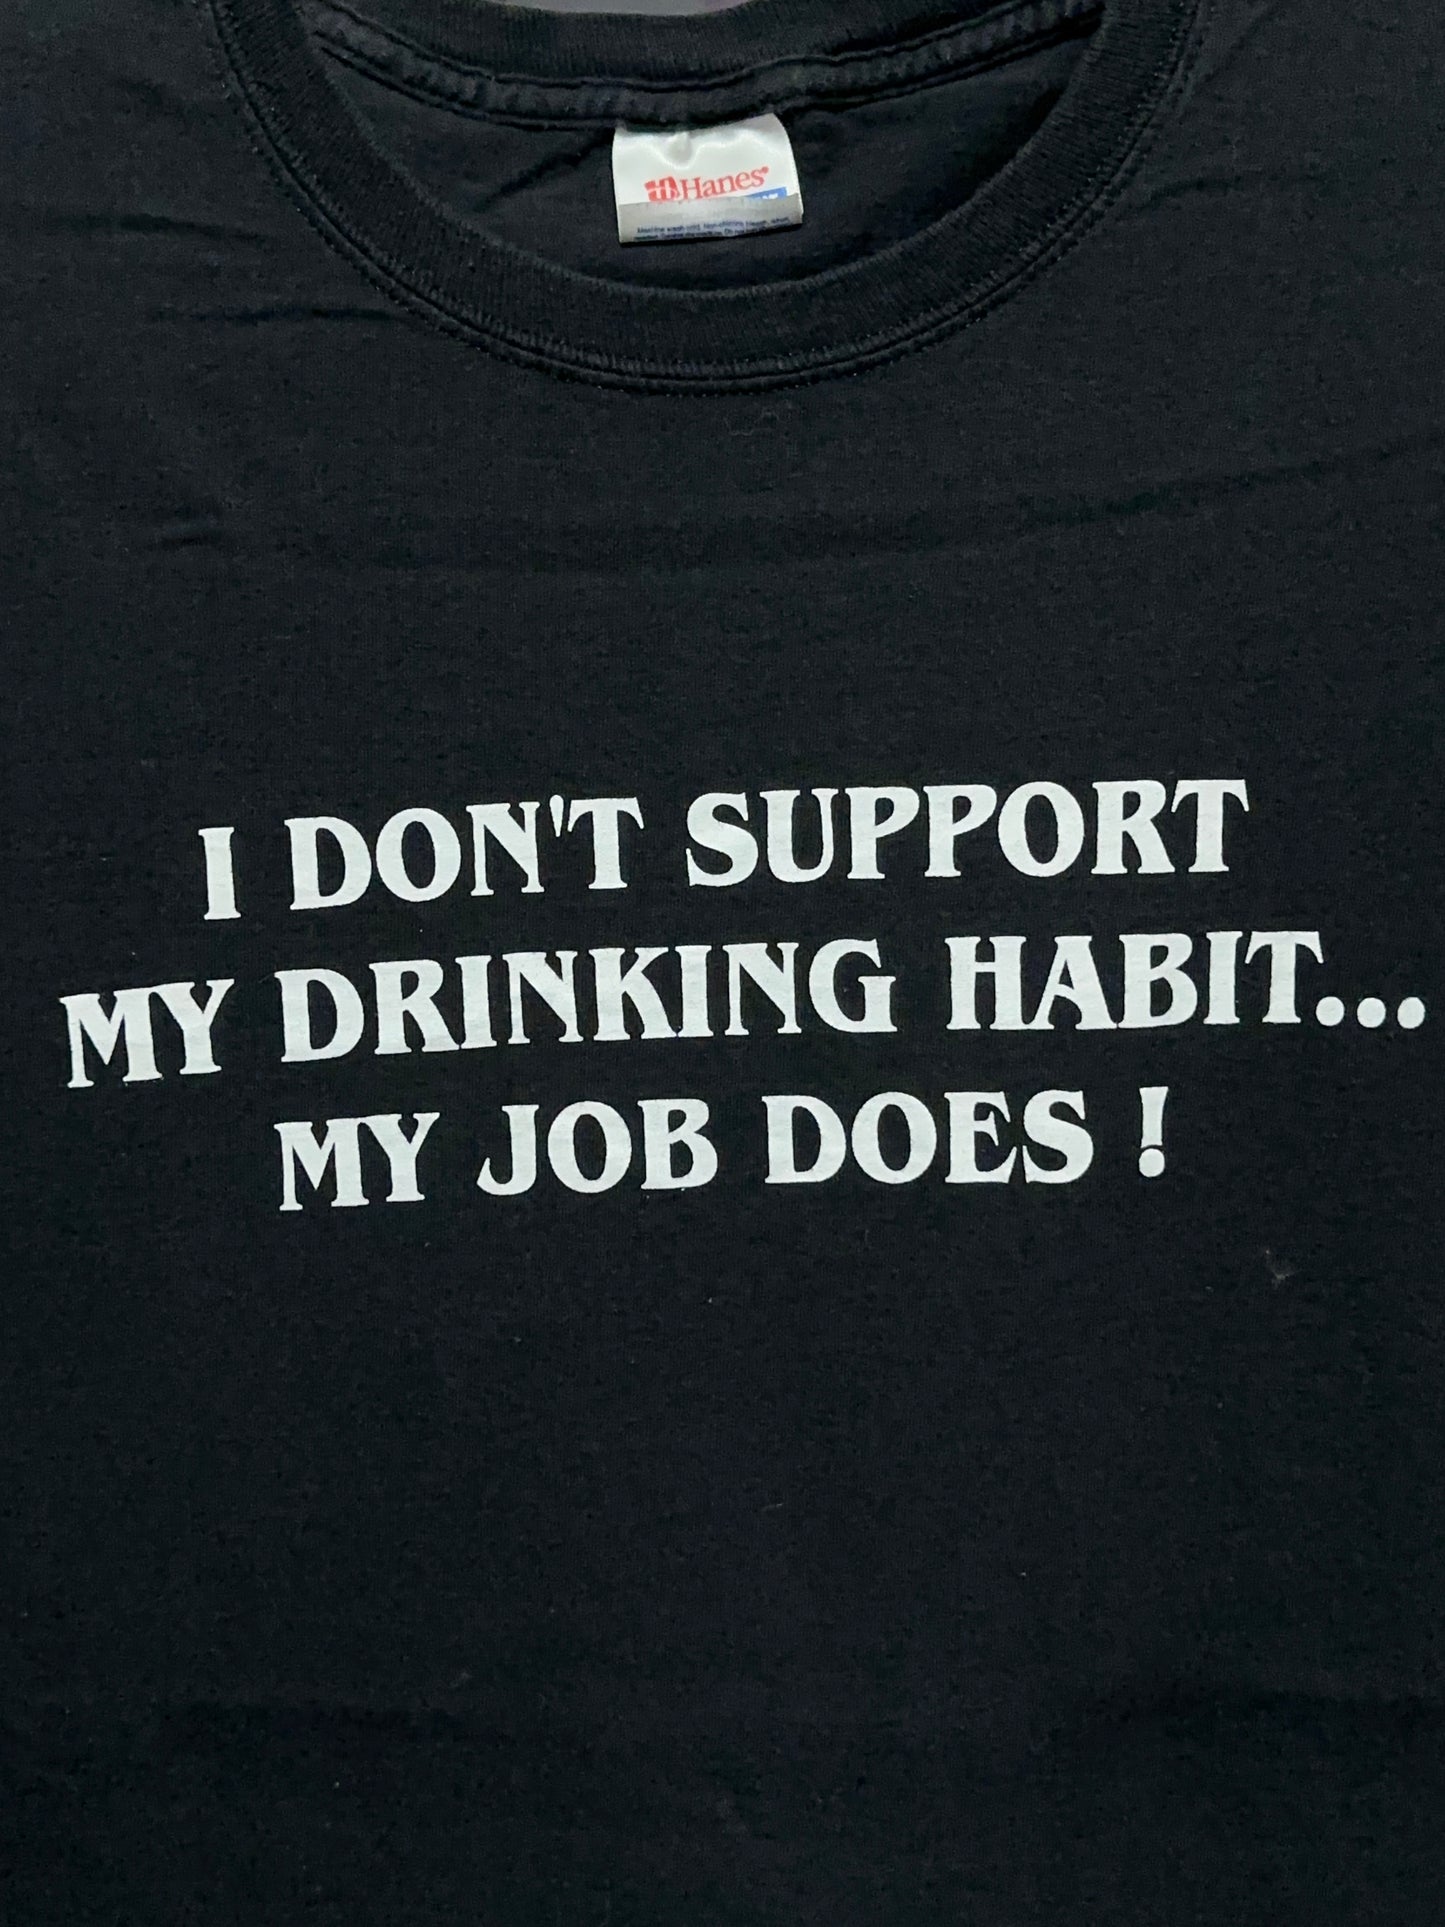 Y2K I Don't Support My Drinking Habit Funny Humor Tee XL